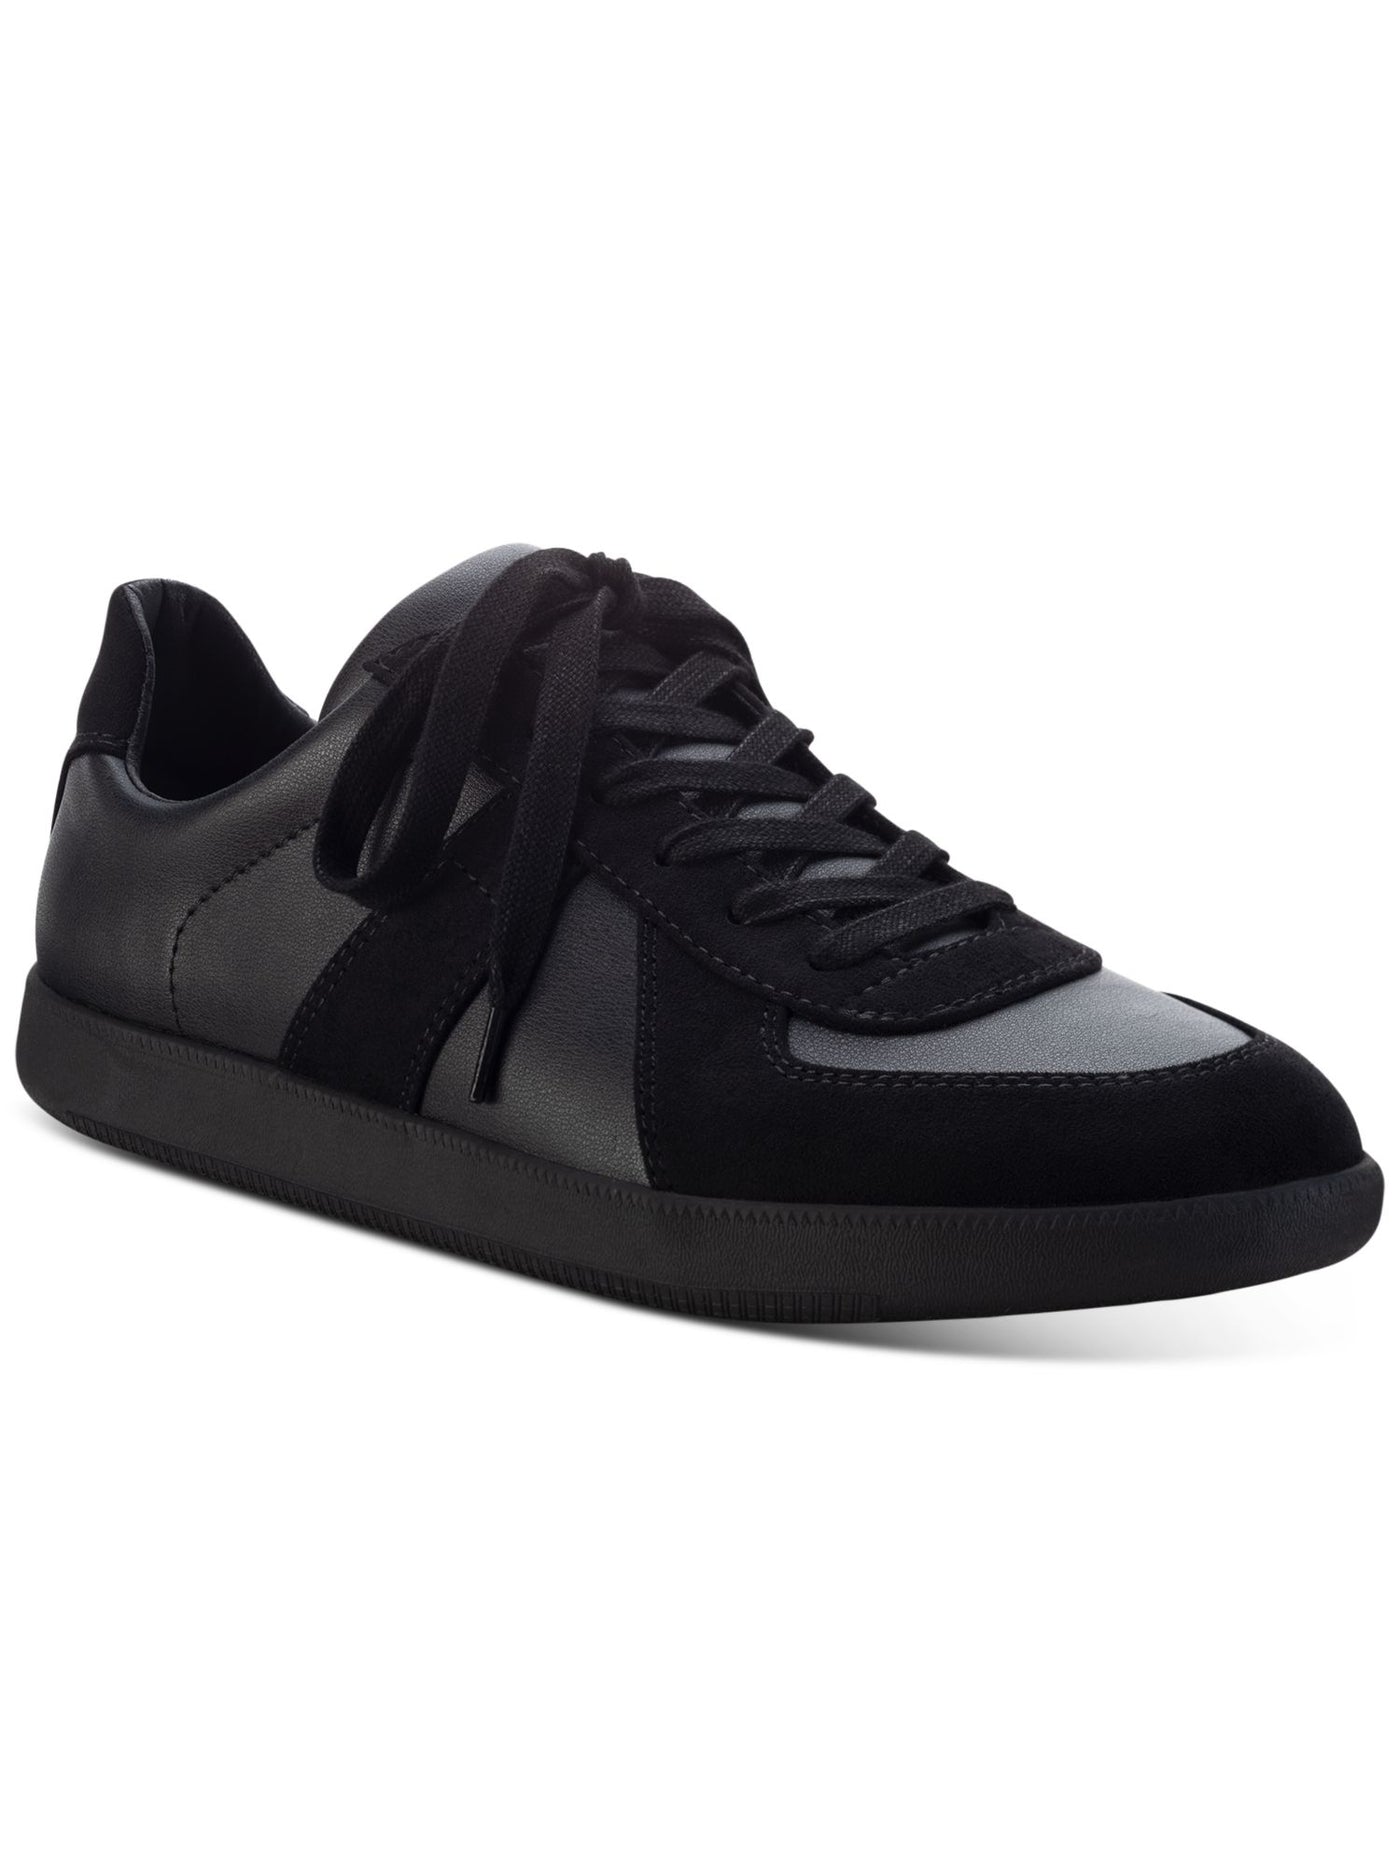 INC Mens Black Padded Court Round Toe Platform Lace-Up Athletic Sneakers Shoes 10 M